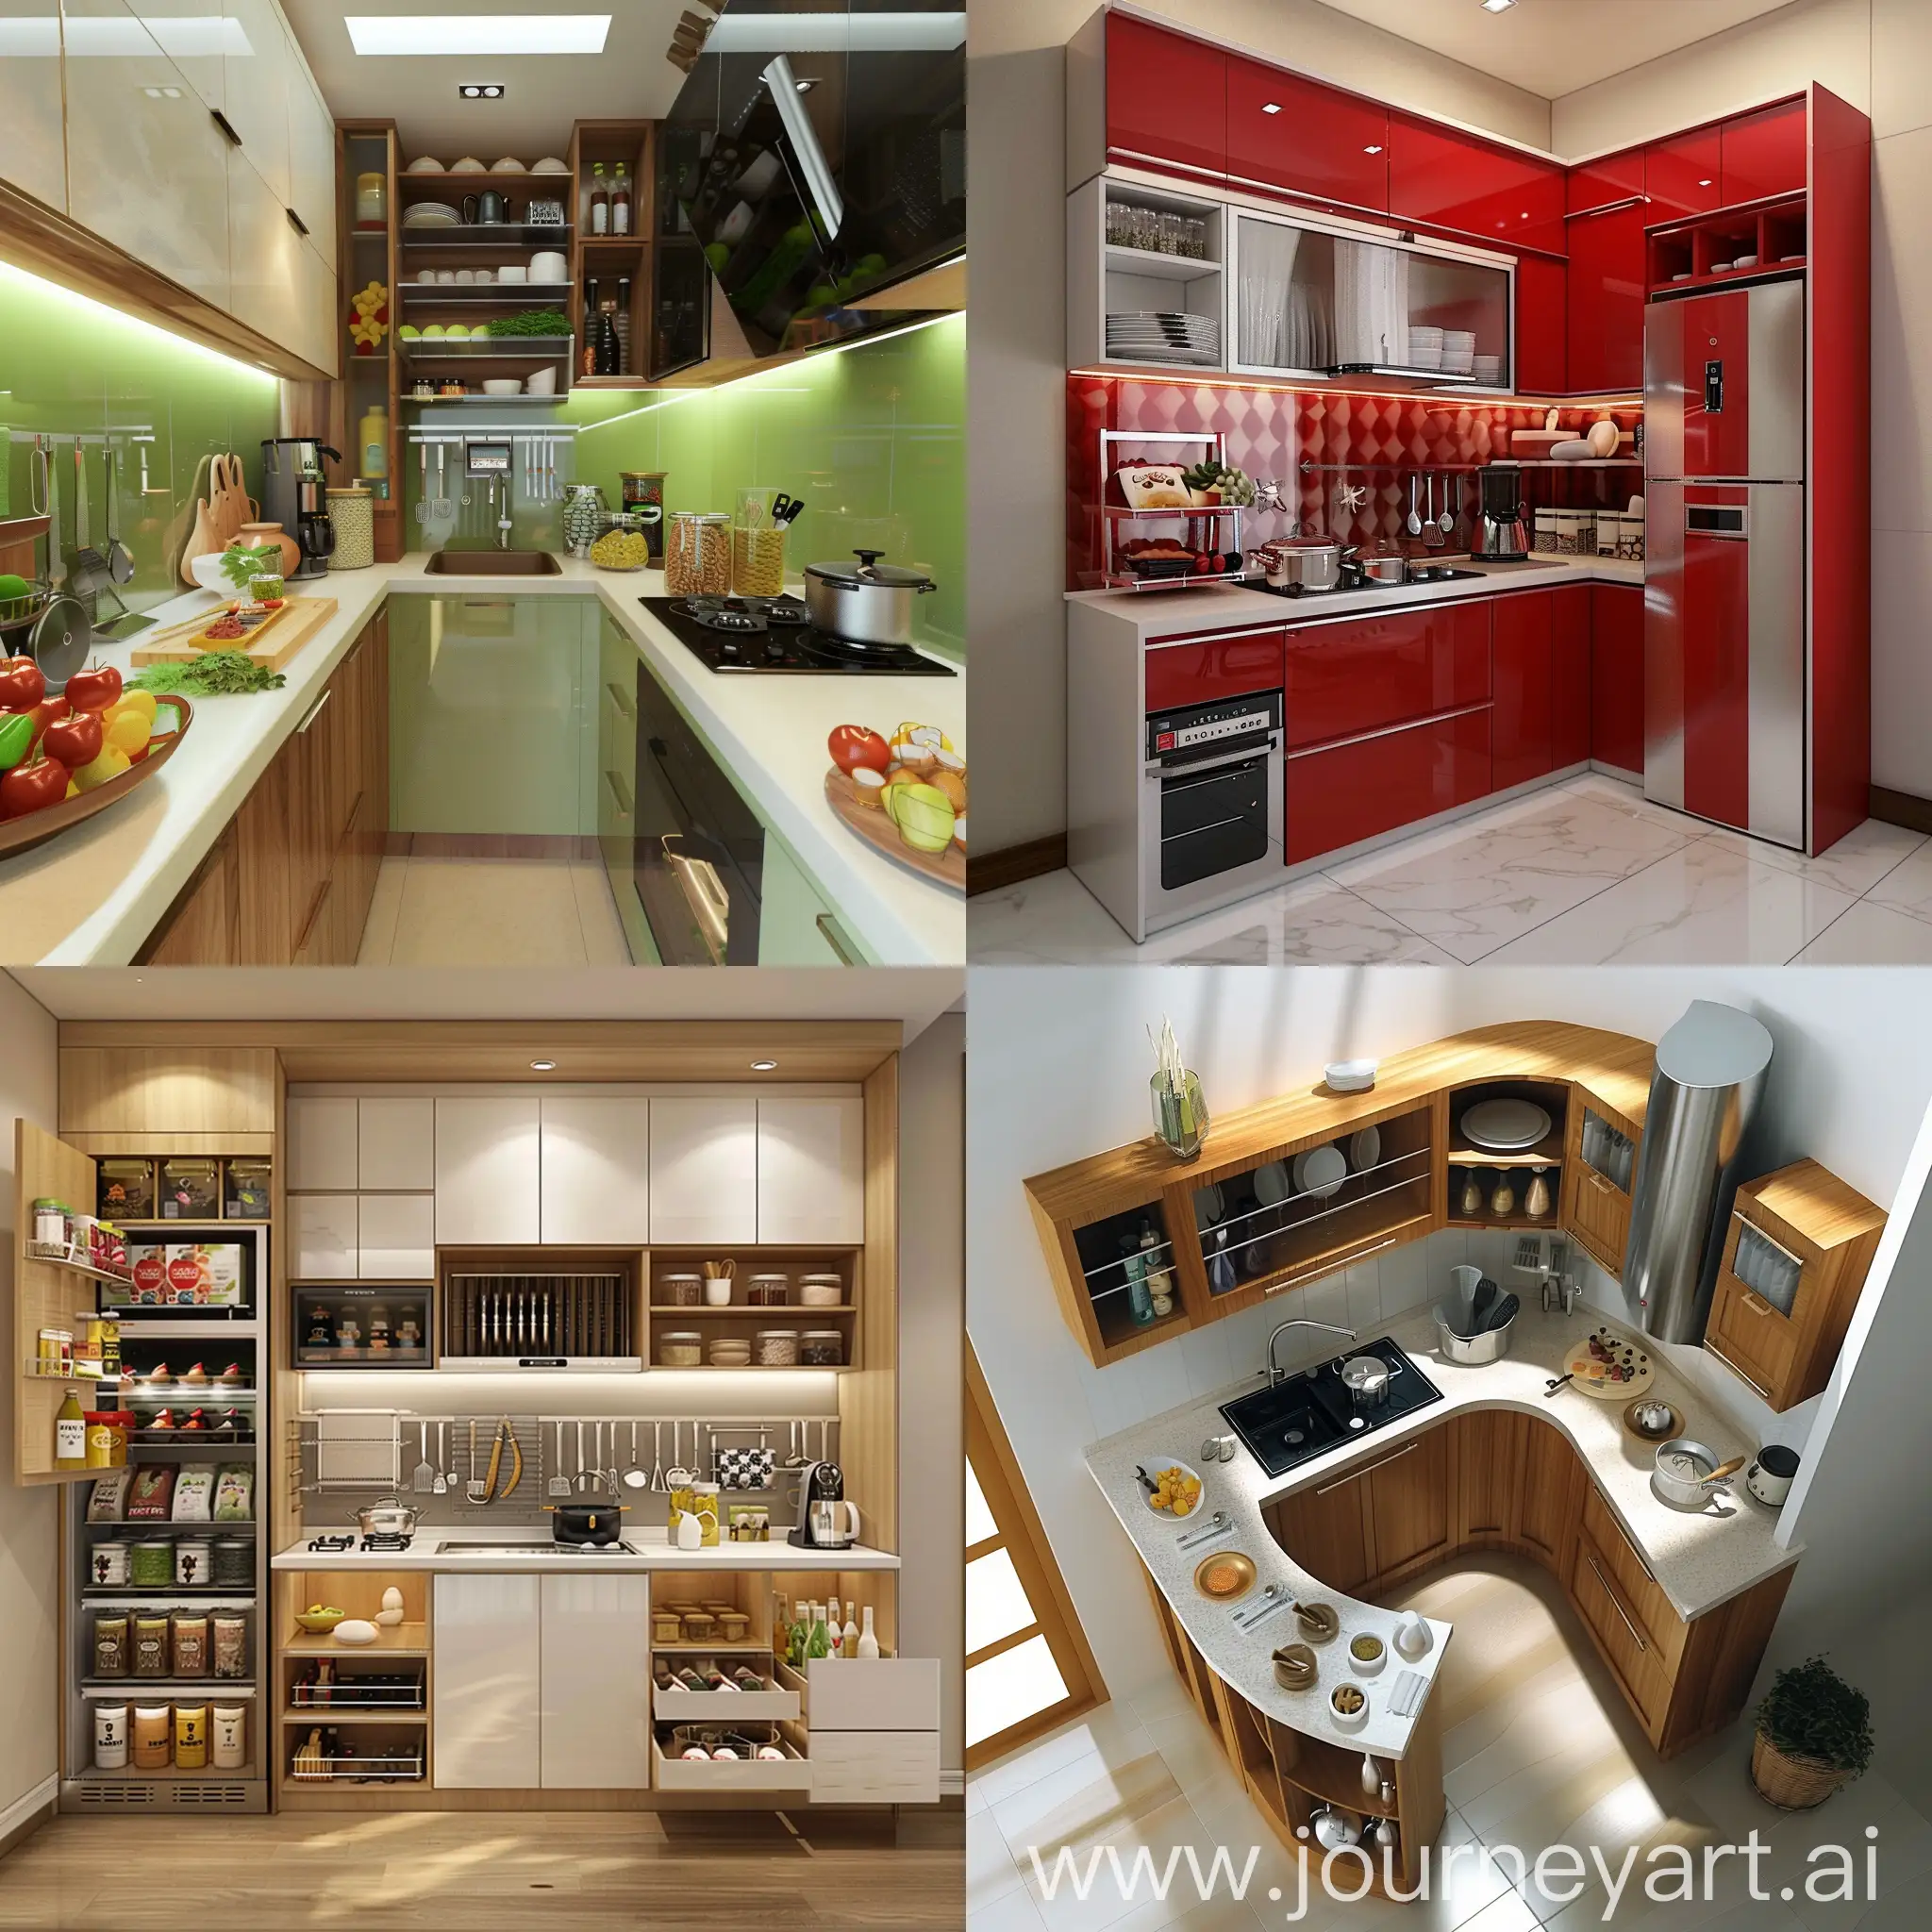 Design a kitchen for the area of 4.5m X 3.5m. The kitchen should be easy to operate and store several items such as snacks and utensils